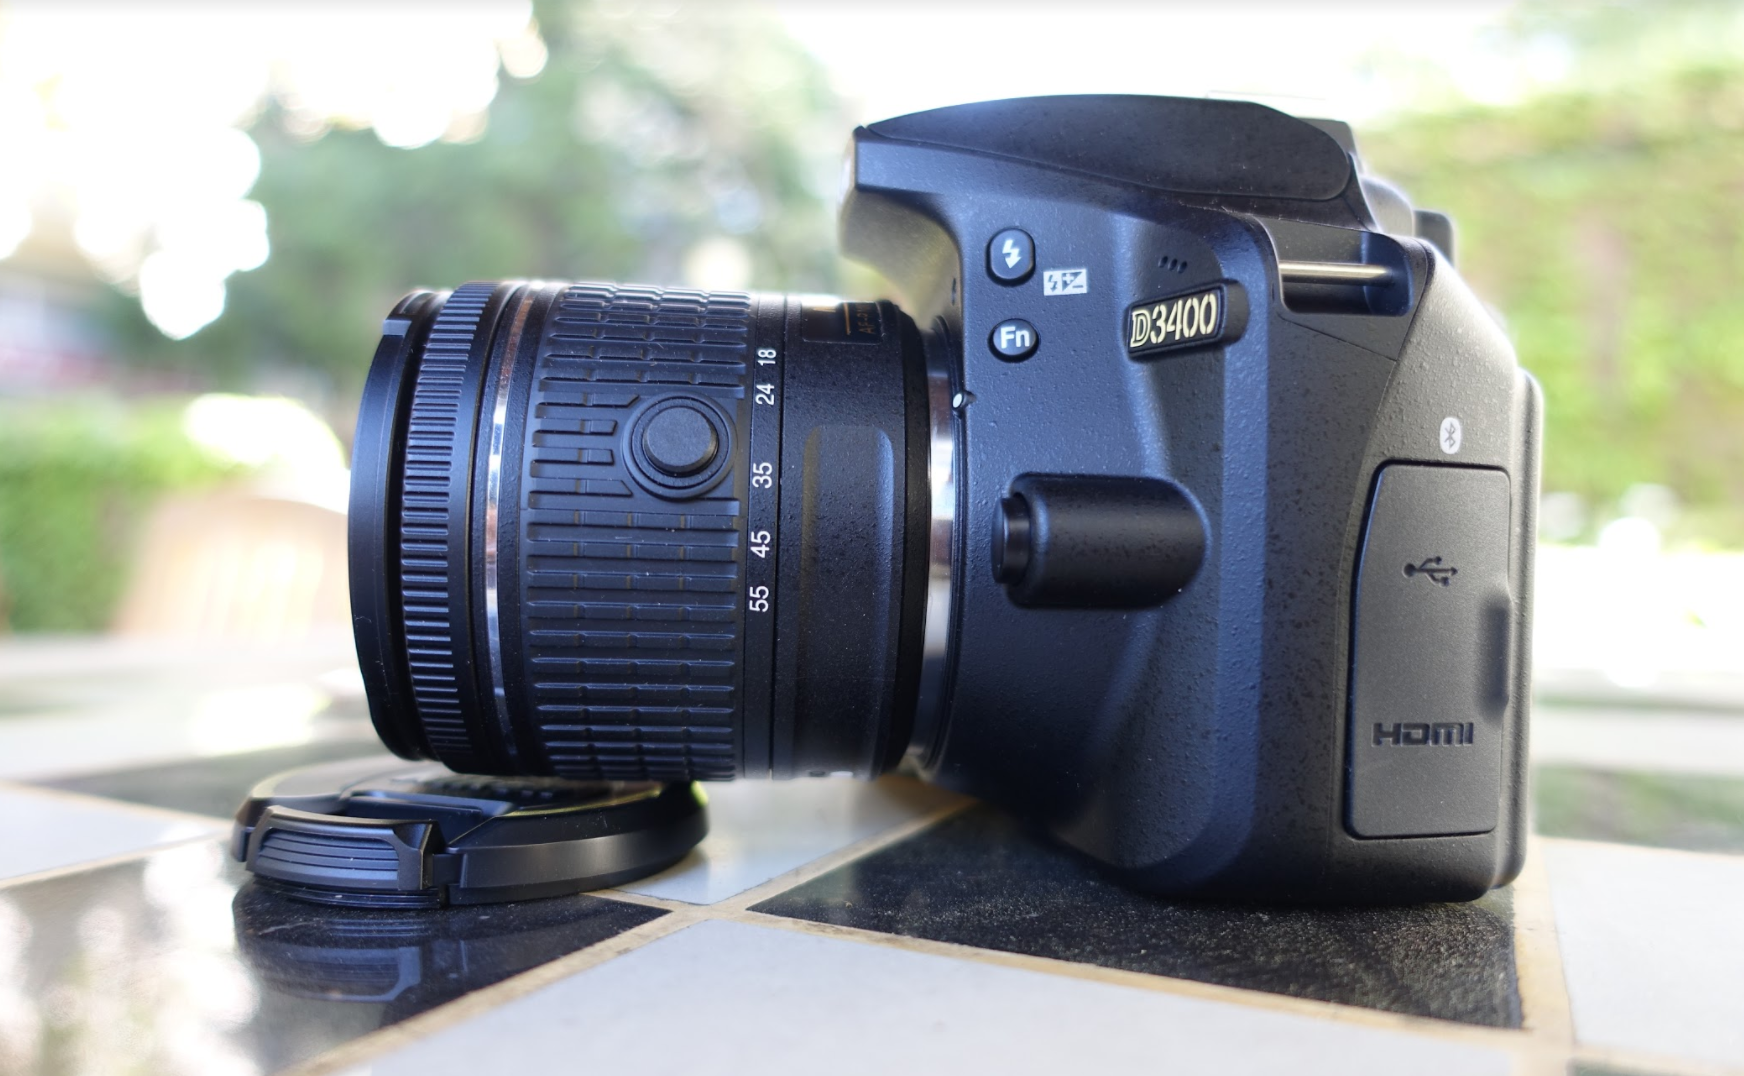  Nikon  D3400  Review An Affordable Entry Level Camera 